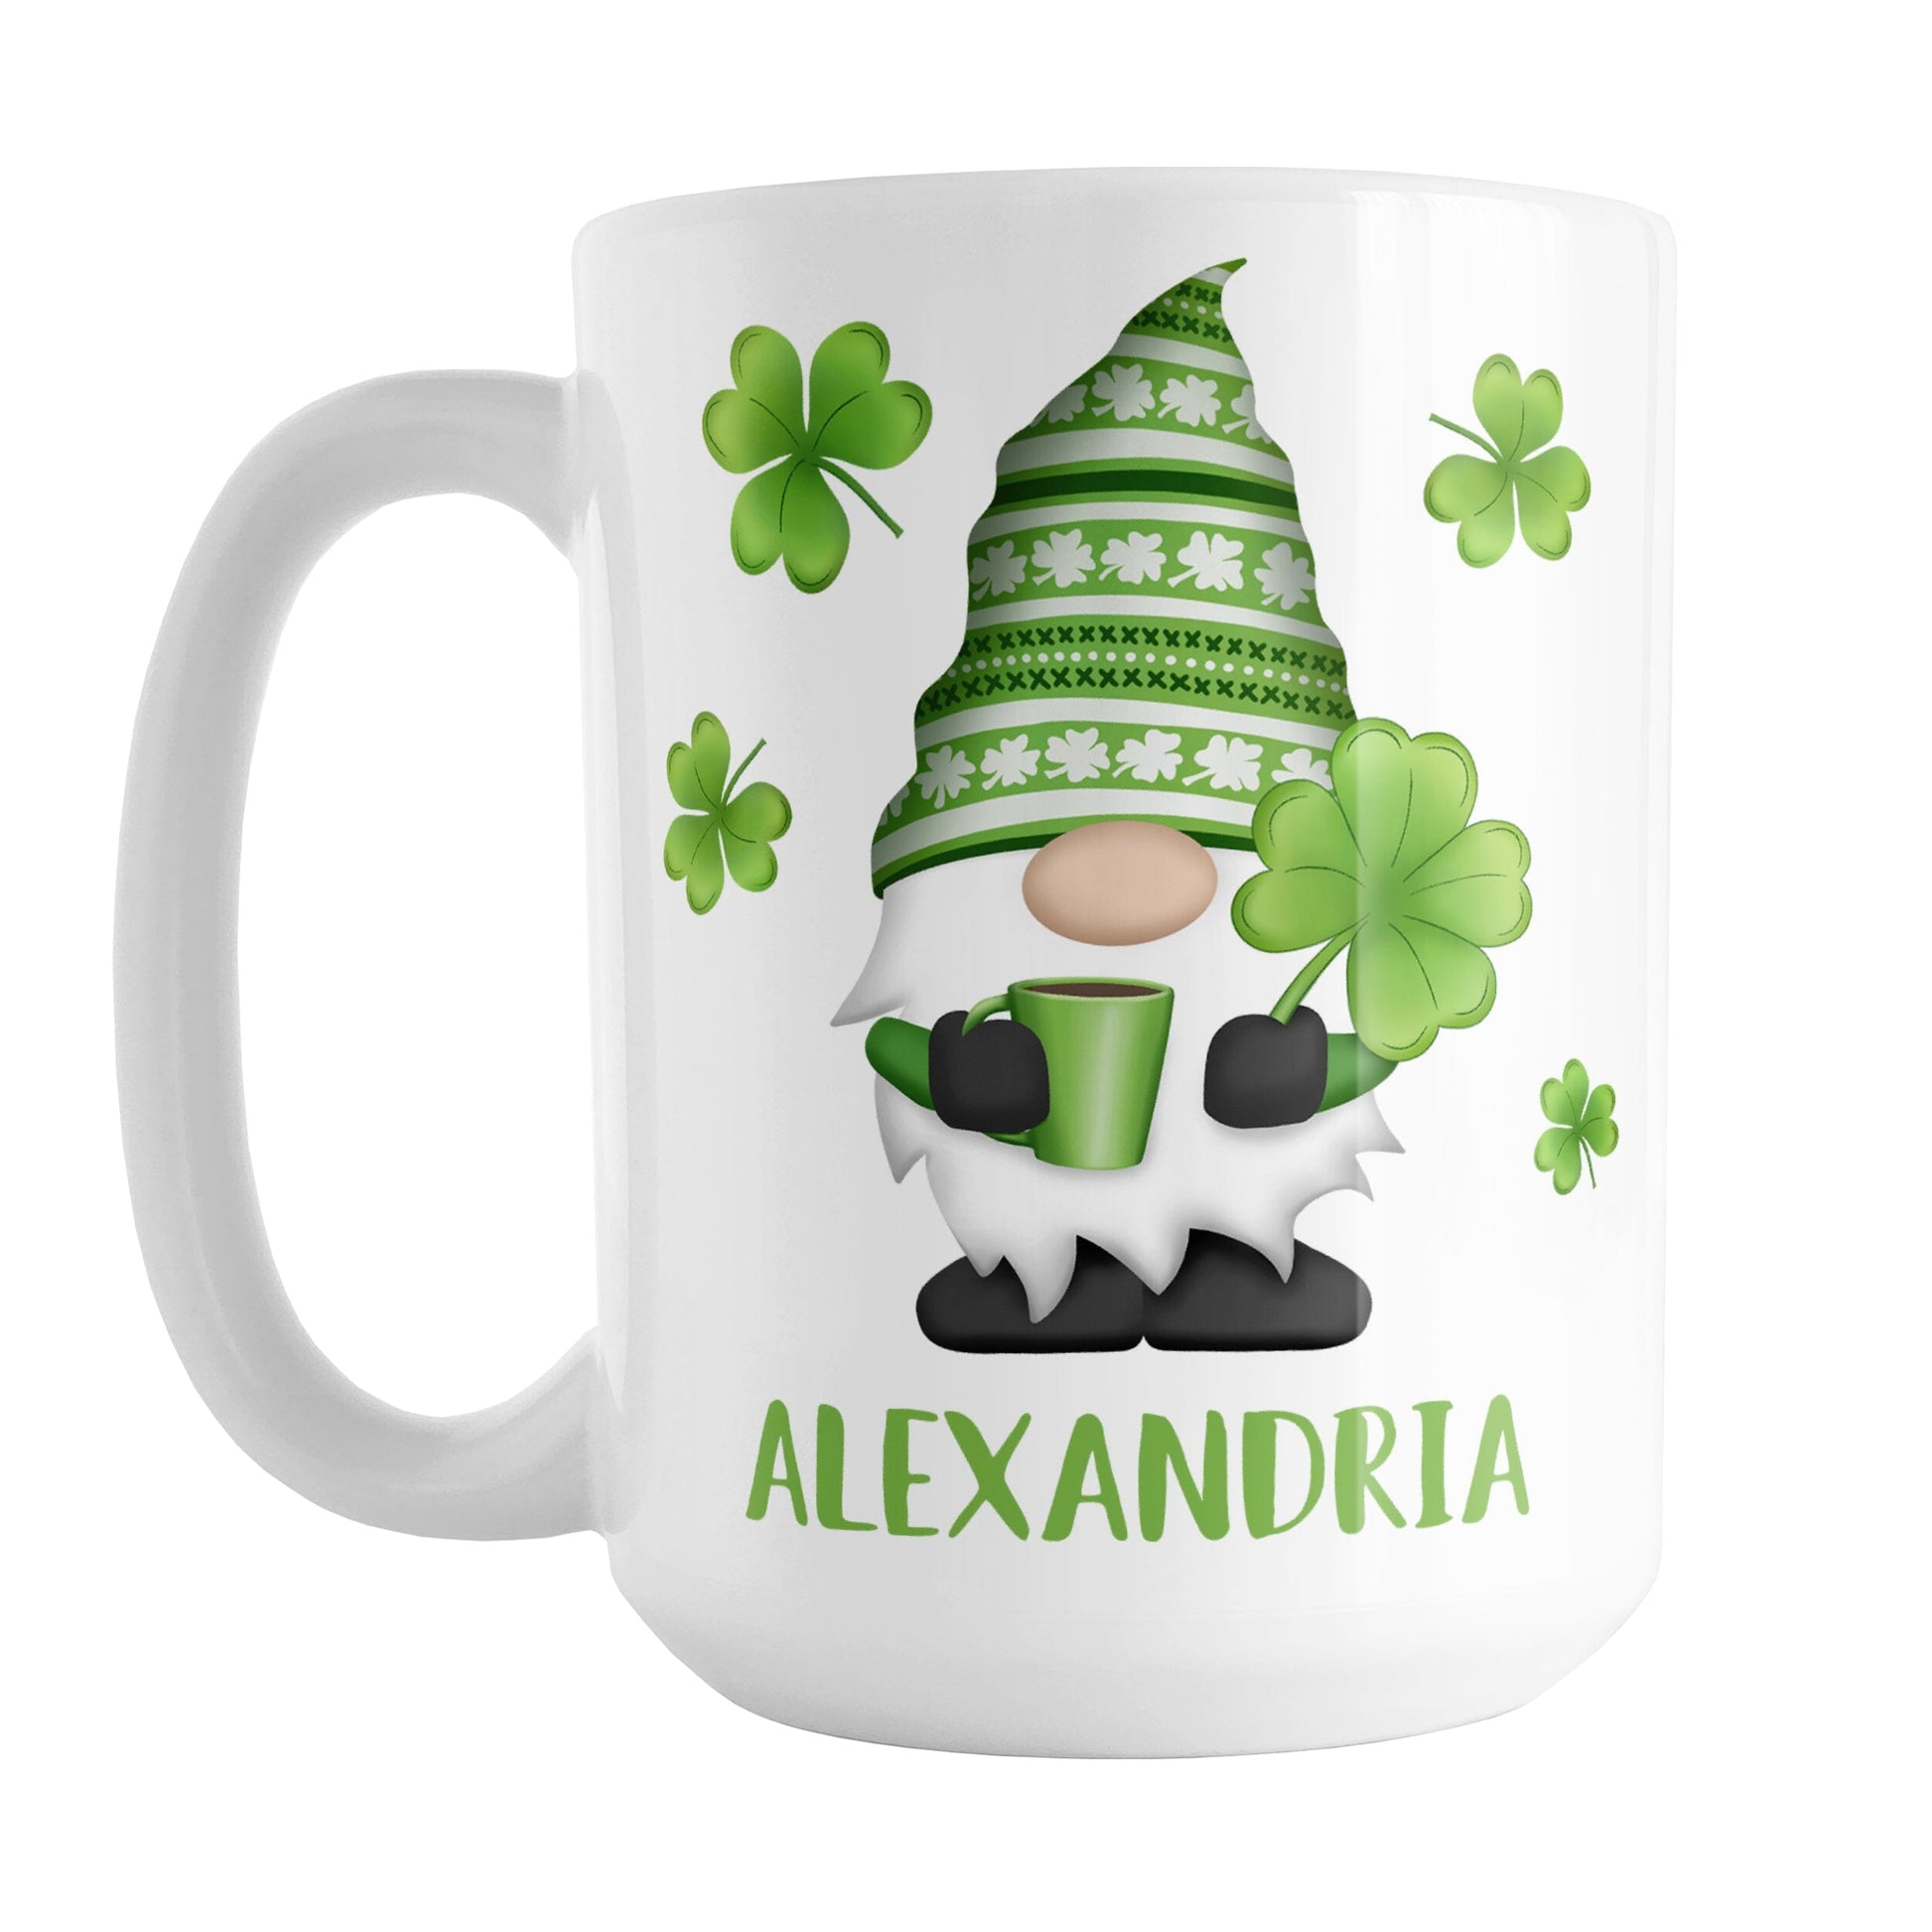 Personalized Lucky Clover Gnome Mug (15oz) at Amy's Coffee Mugs. A ceramic coffee mug designed with a gnome with a festive green clover pattern hat, holding a hot beverage and large 4-leaf clover, with shamrocks around the gnome. A personalized name is printed below the gnome in green, making it the perfect gift. This cute lucky clover gnome illustration and personalization are on both sides of the mug. 